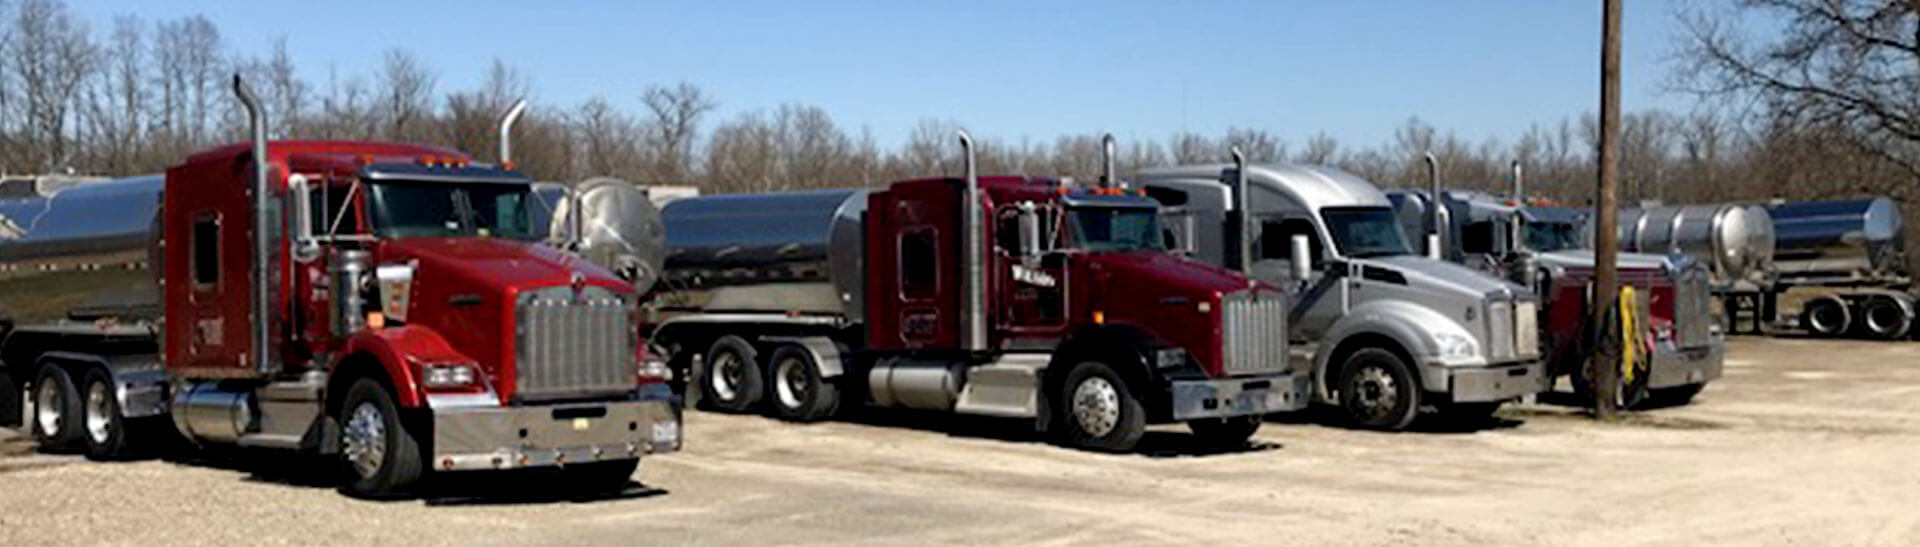 Lexington, KY Trucking Company and Trucking Services